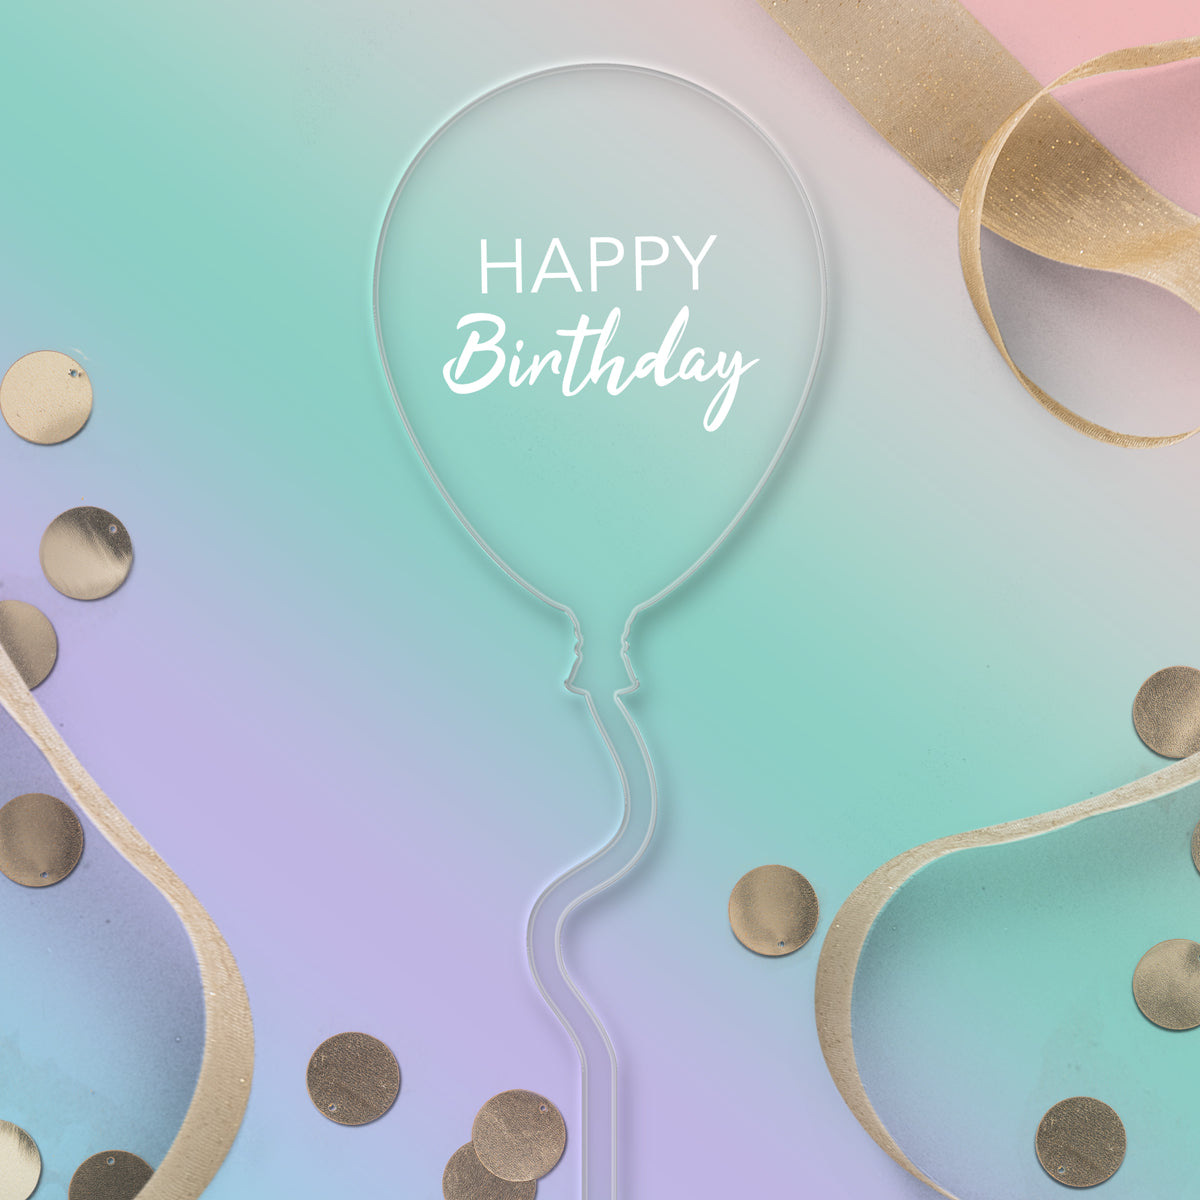 Happy Birthday Clear Acrylic Balloon Topper - White Wording Style 1